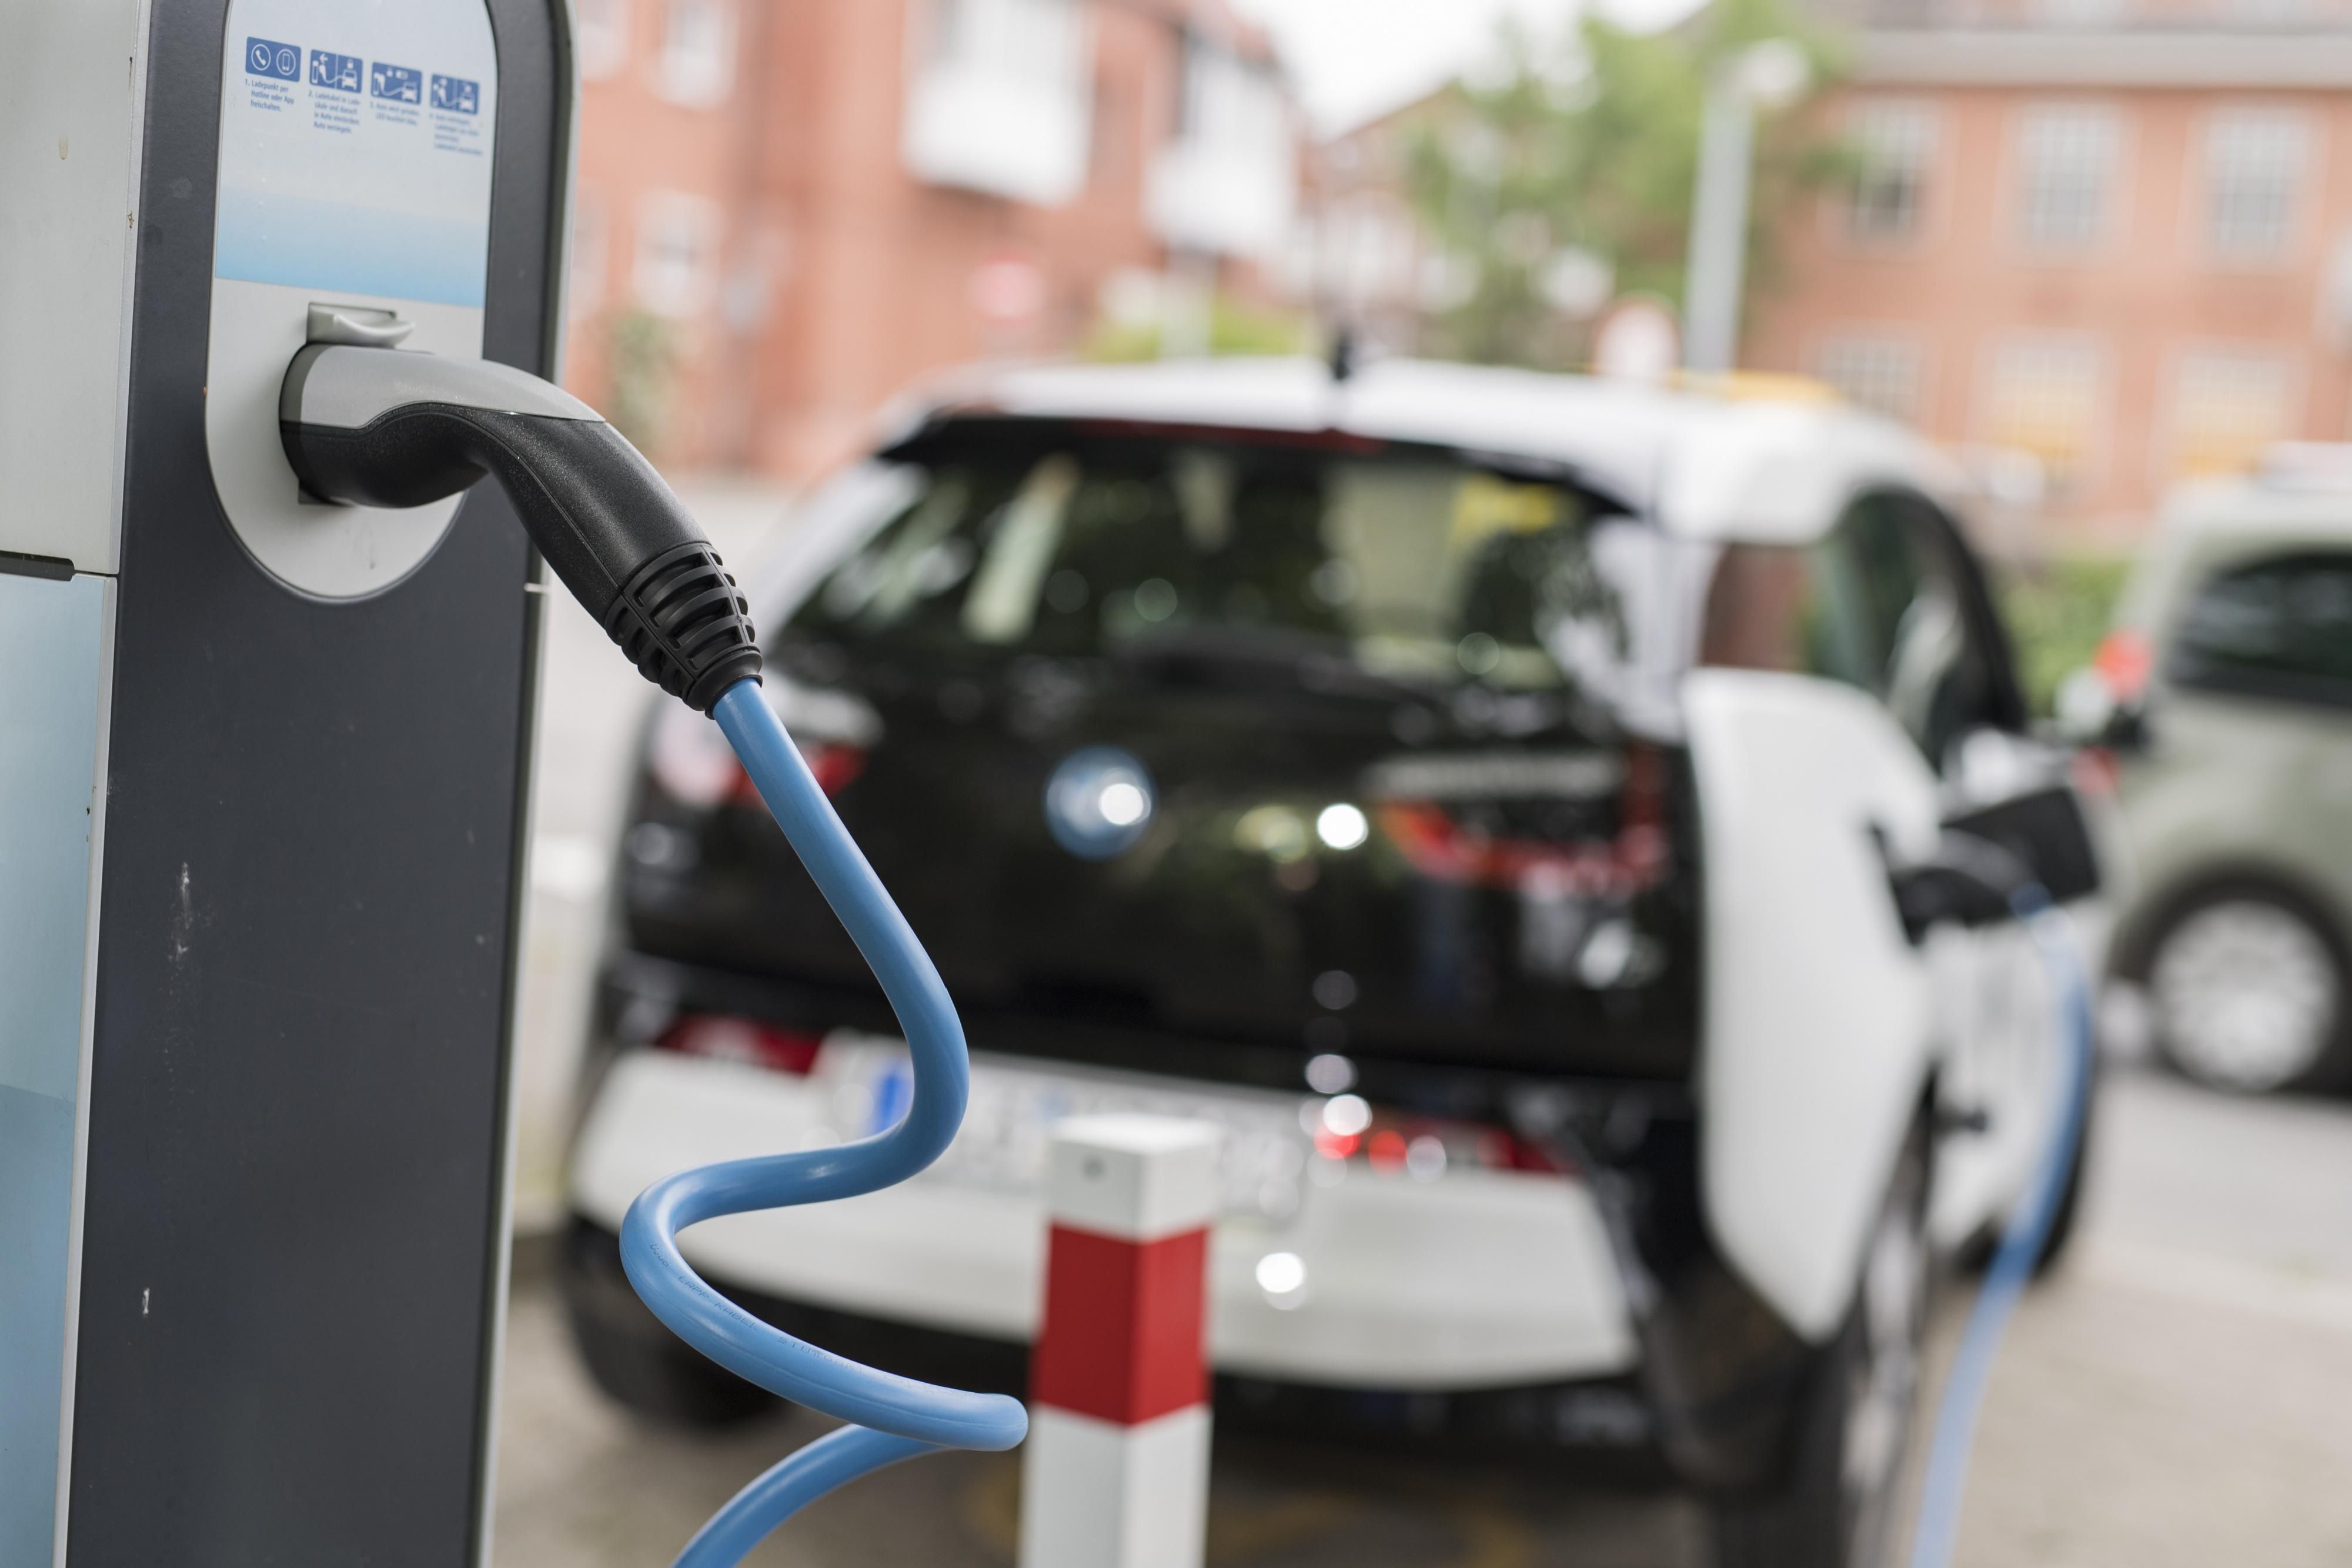 For the electric vehicle industry to be a catalyst for good-paying jobs in the U.S., lawmakers must develop better trade agreements and encourage unionization, researchers from the Economic Policy Institute argued Wednesday. (Photo: Shutterstock)